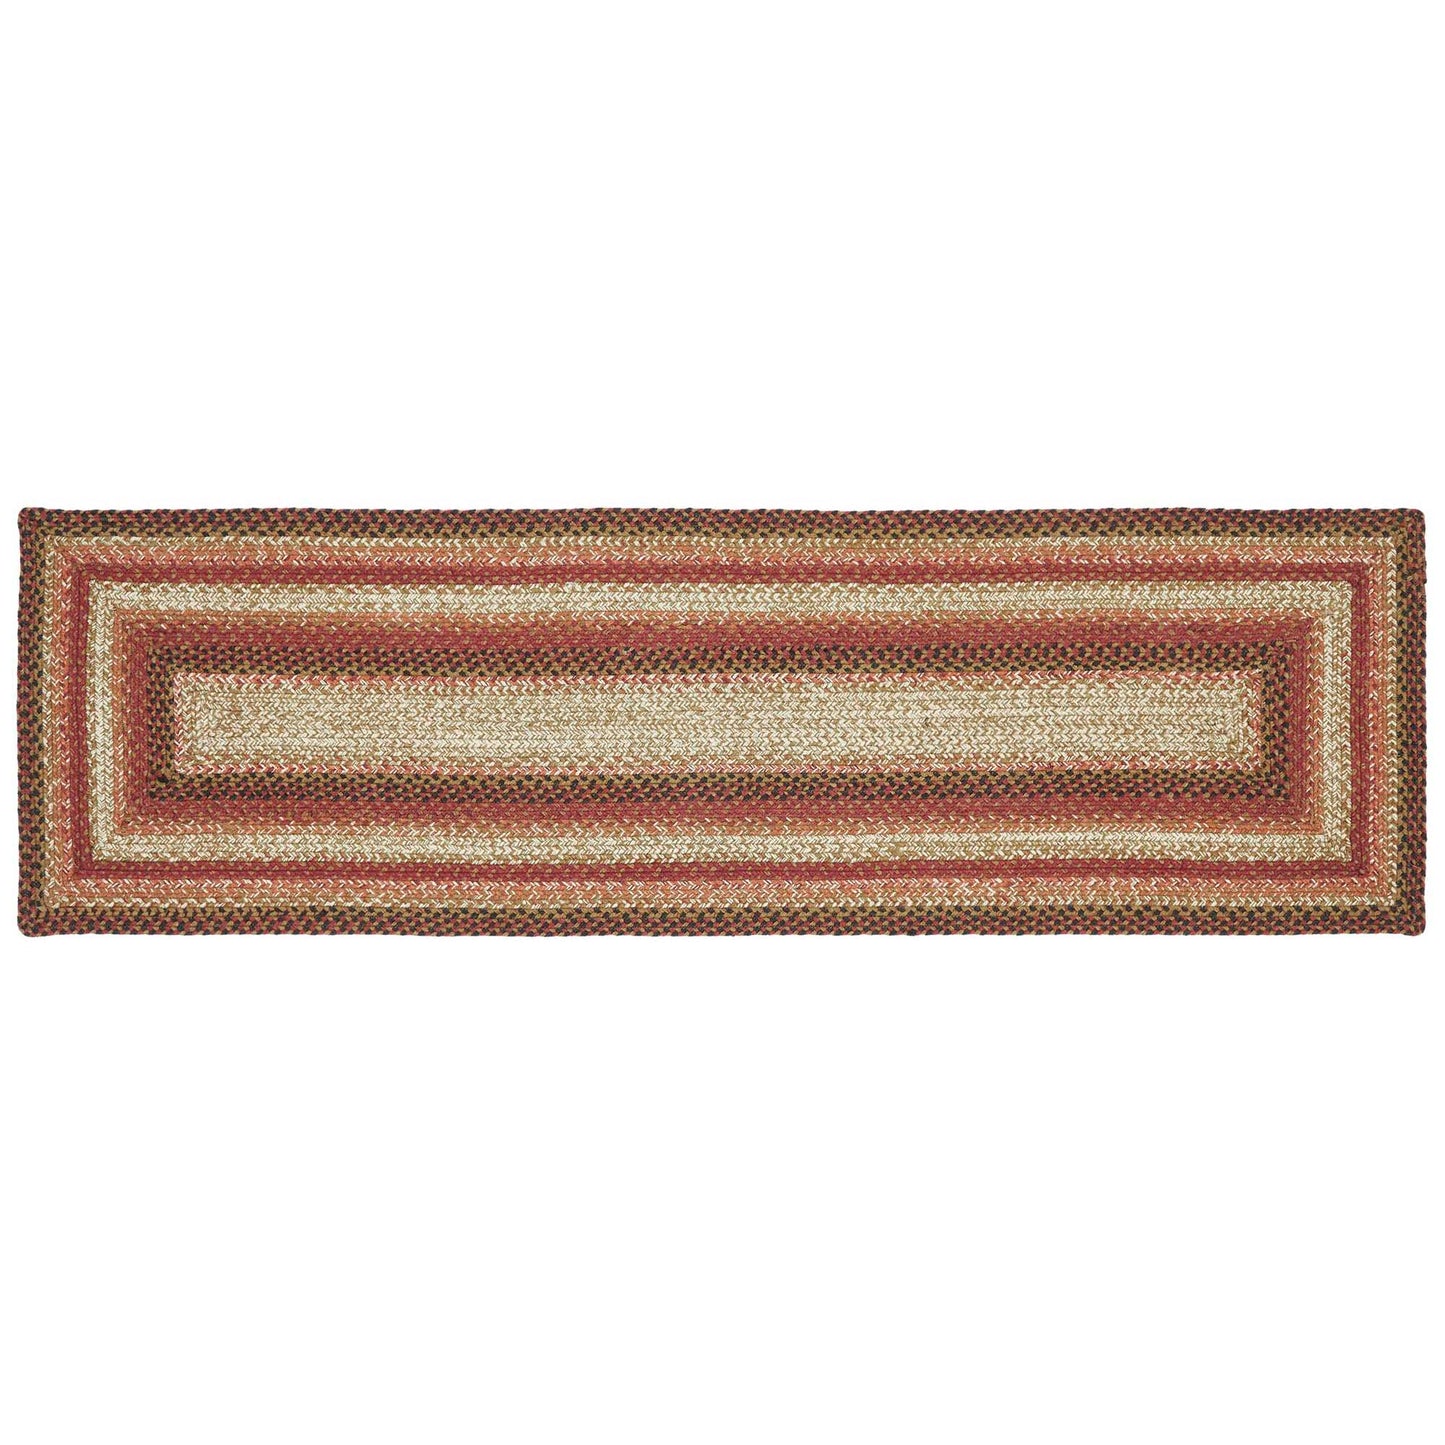 67119-Ginger-Spice-Jute-Rug-Runner-Rect-w-Pad-22x72-image-3